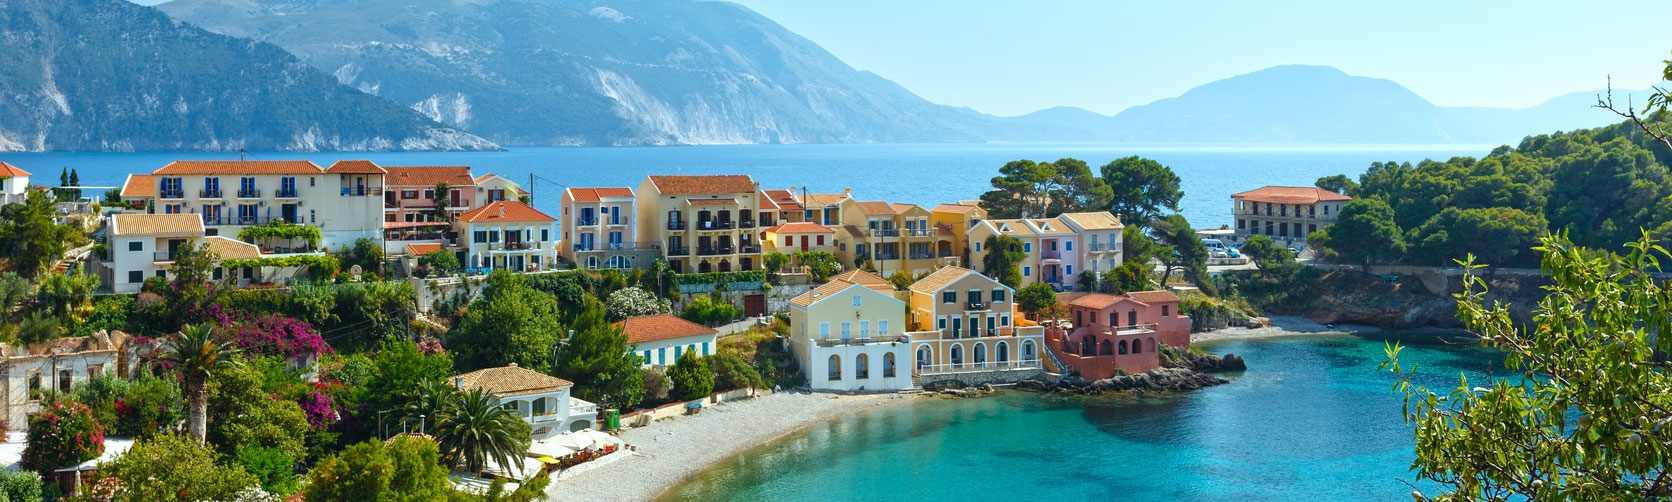 The town of Assos on Cefalonia, Greece.